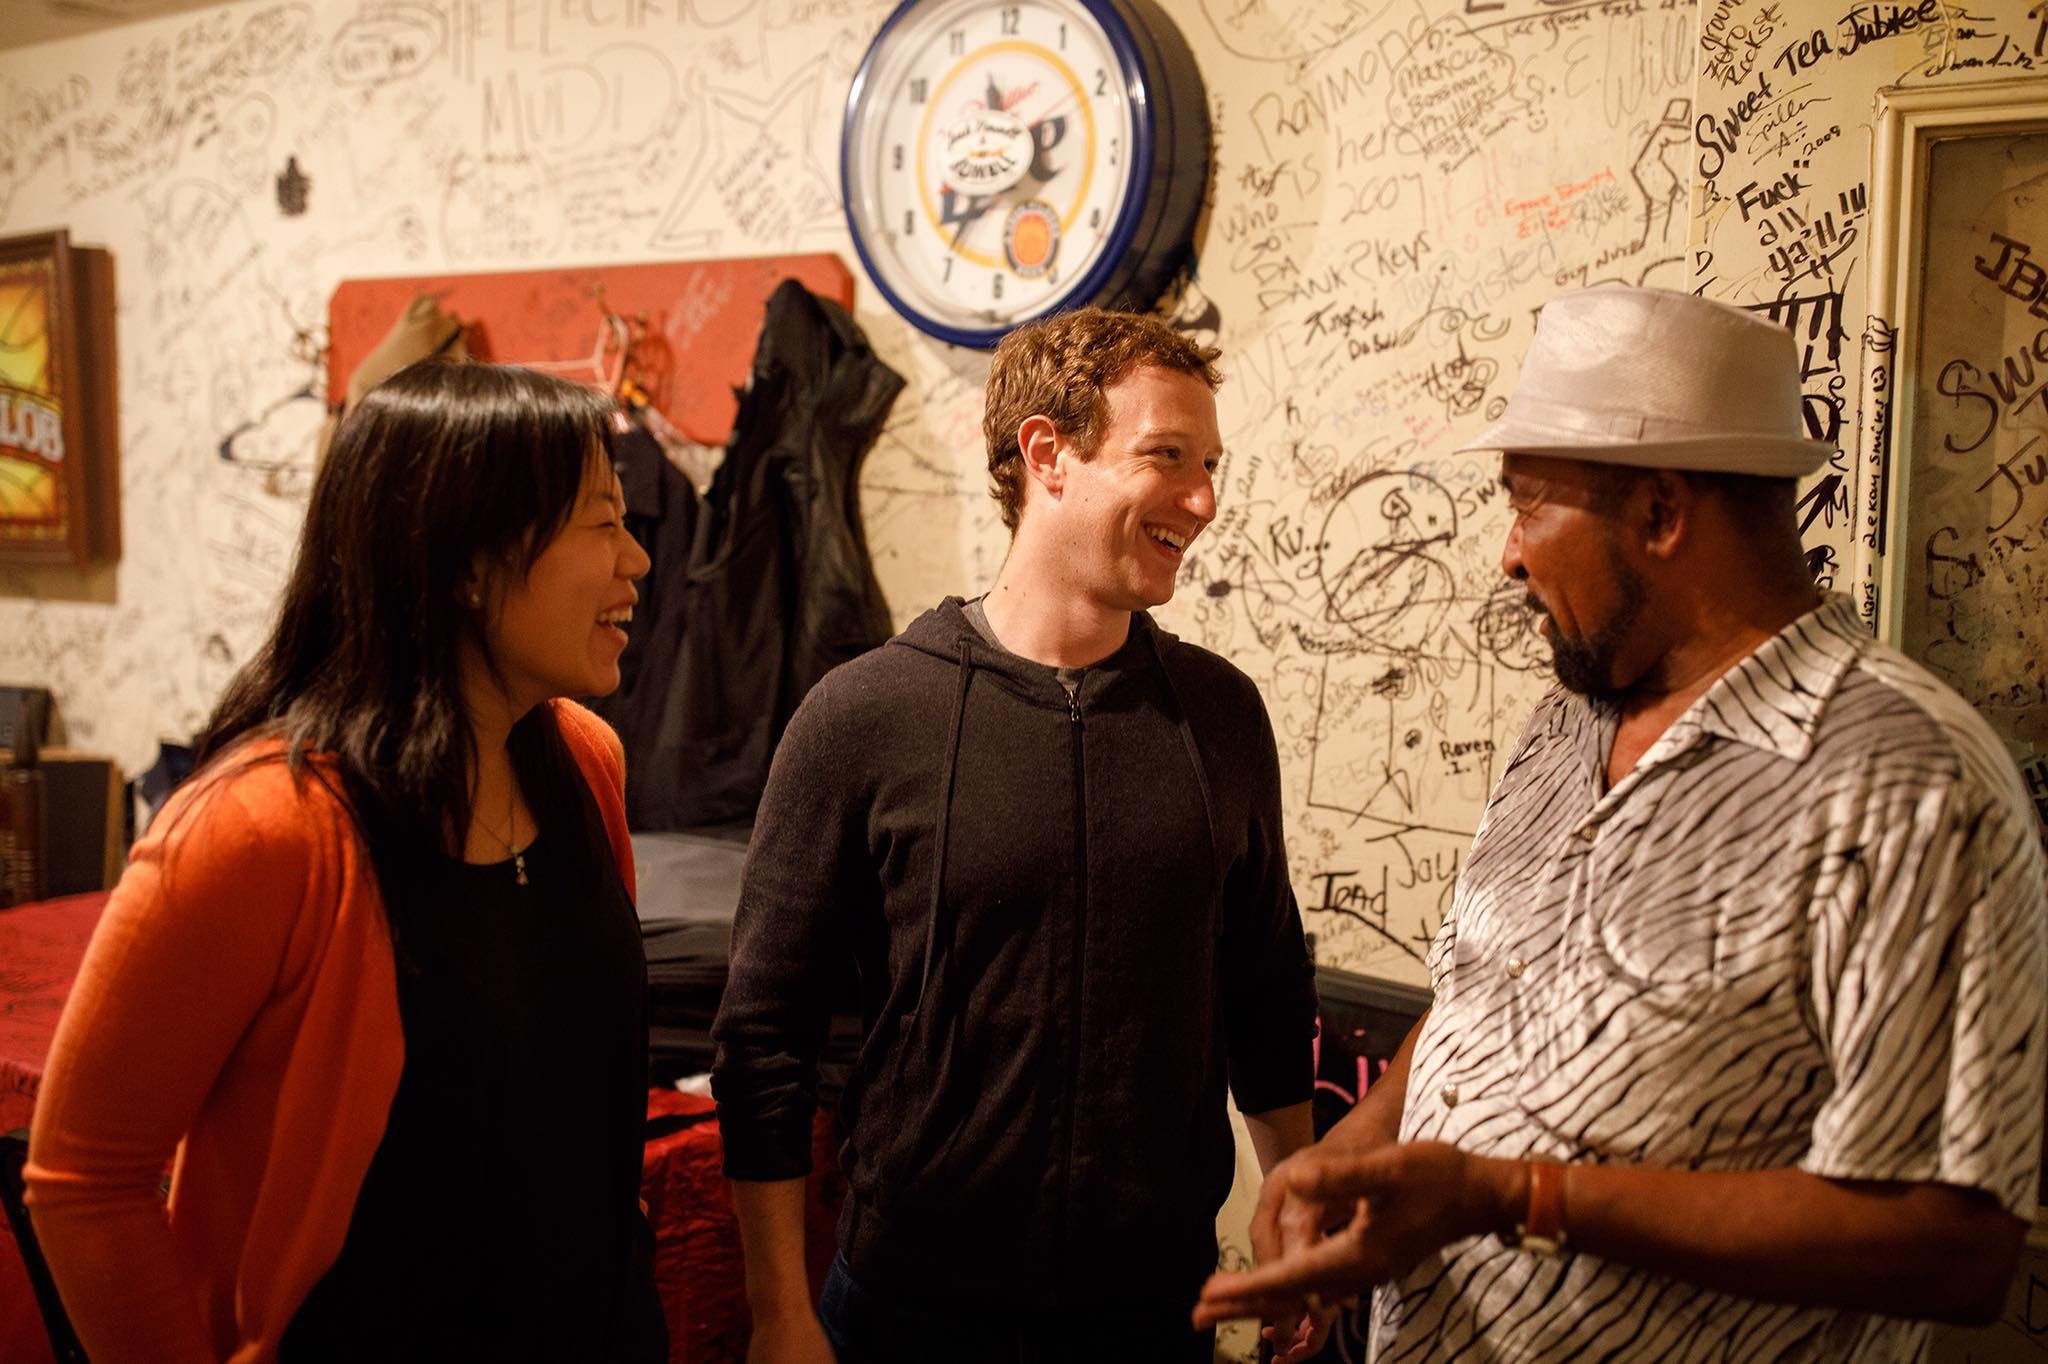 Facebook CEO Mark Zuckerberg (middle) and wife Priscilla Chan stopped in Clarksdale, Mississippi, Tuesday night as part of a road trip with the goal of visiting communities in every state by the end of 2017. (Mark Zuckerberg/Facebook)